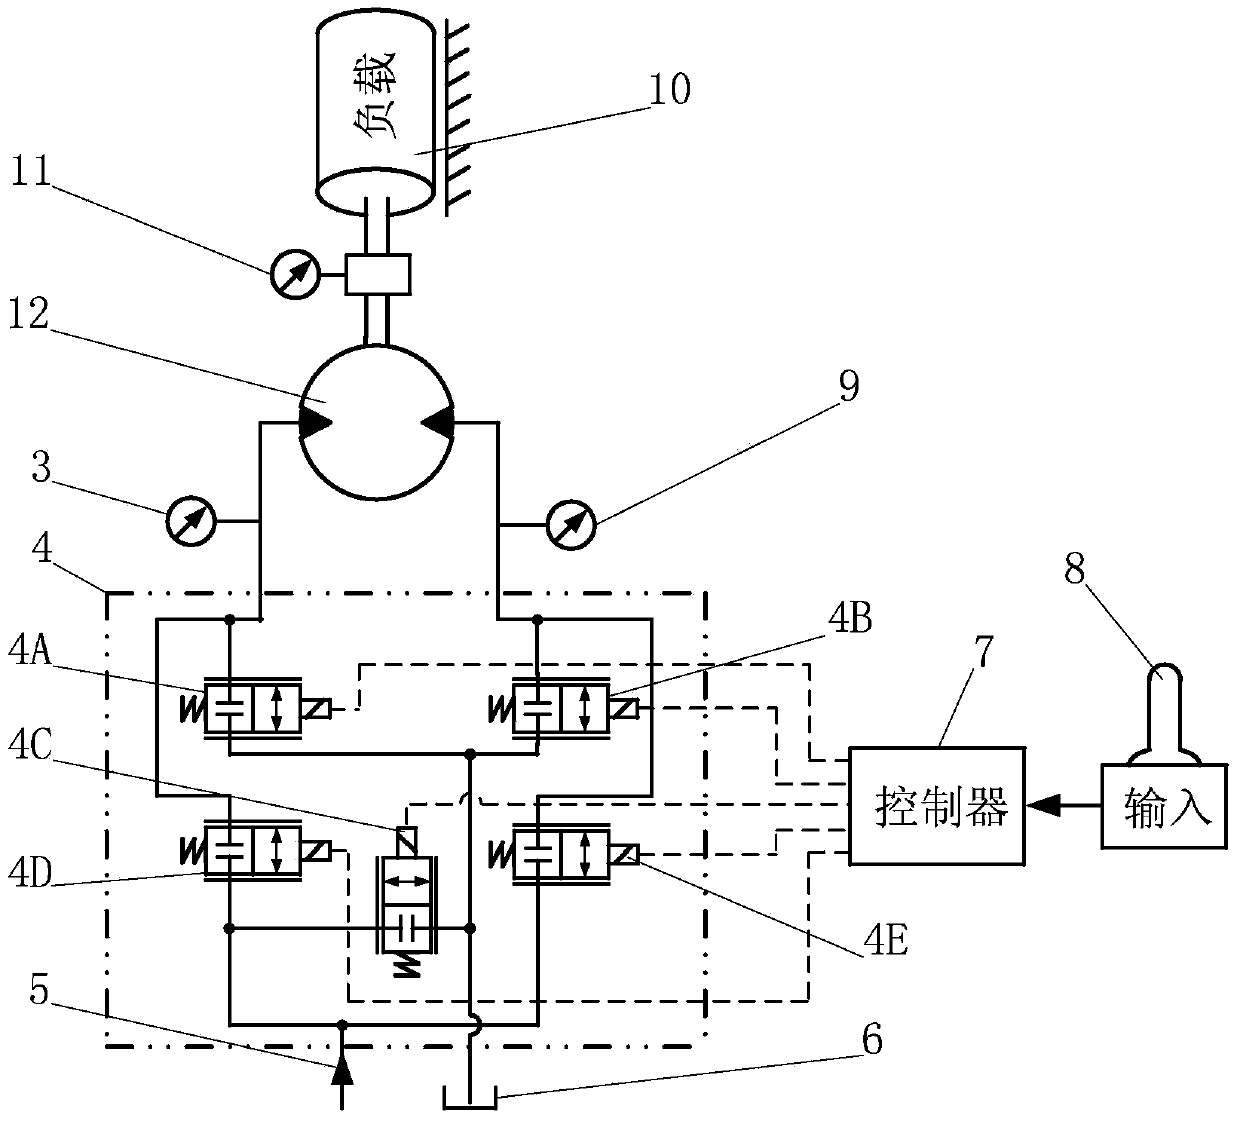 Programmable integrated control system capable of controlling inlet and outlet oil ways independently